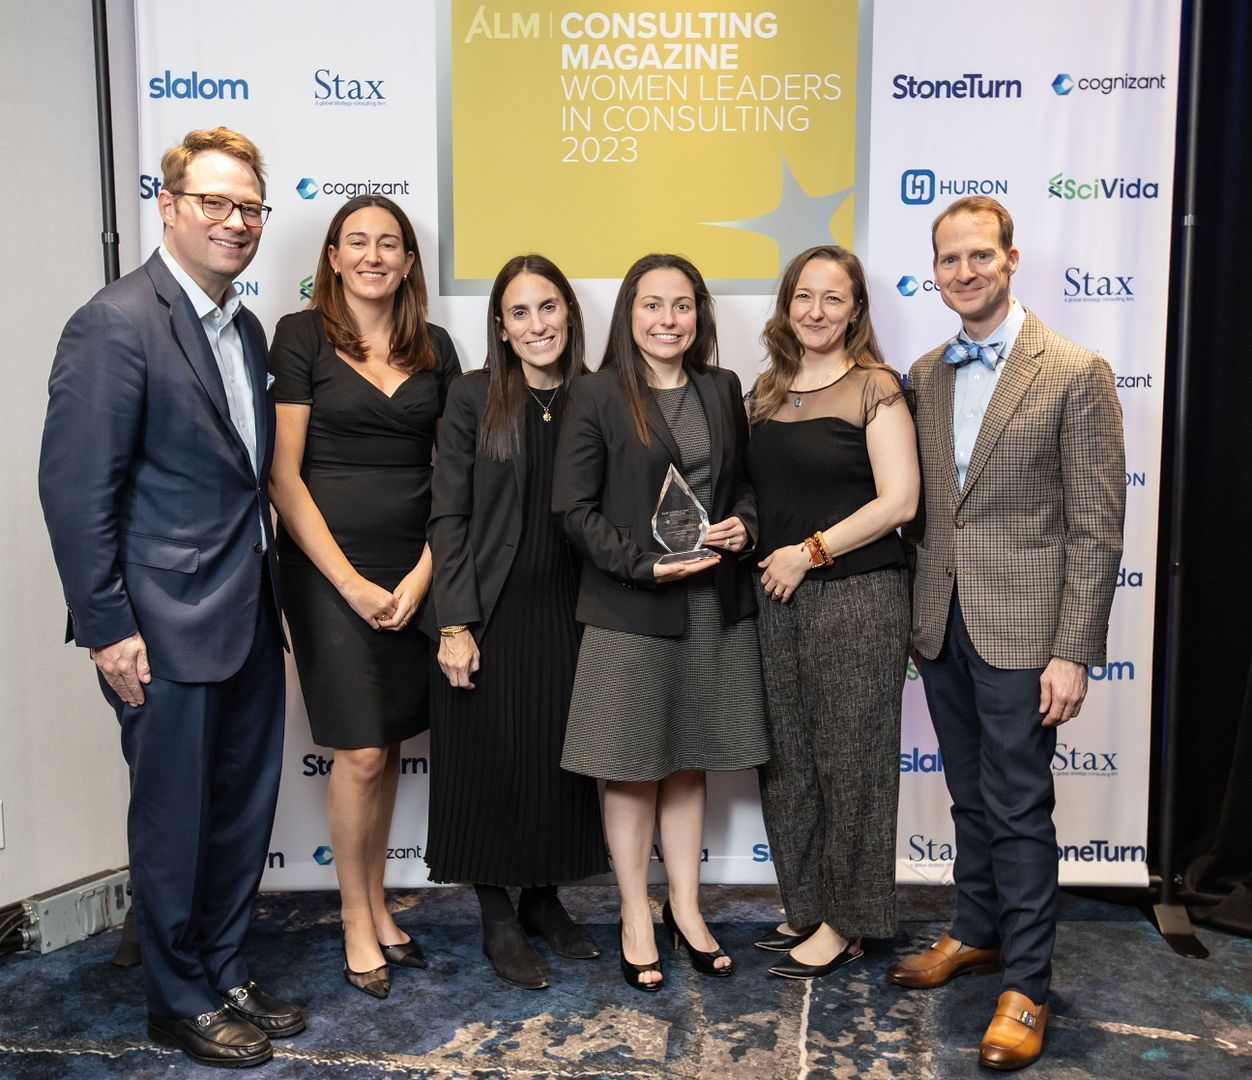 The Stax team at Consulting Magazine’s 2023 Women Leaders in Consulting Awards which honored fellow Staxer, Kelsey Chisholm. 